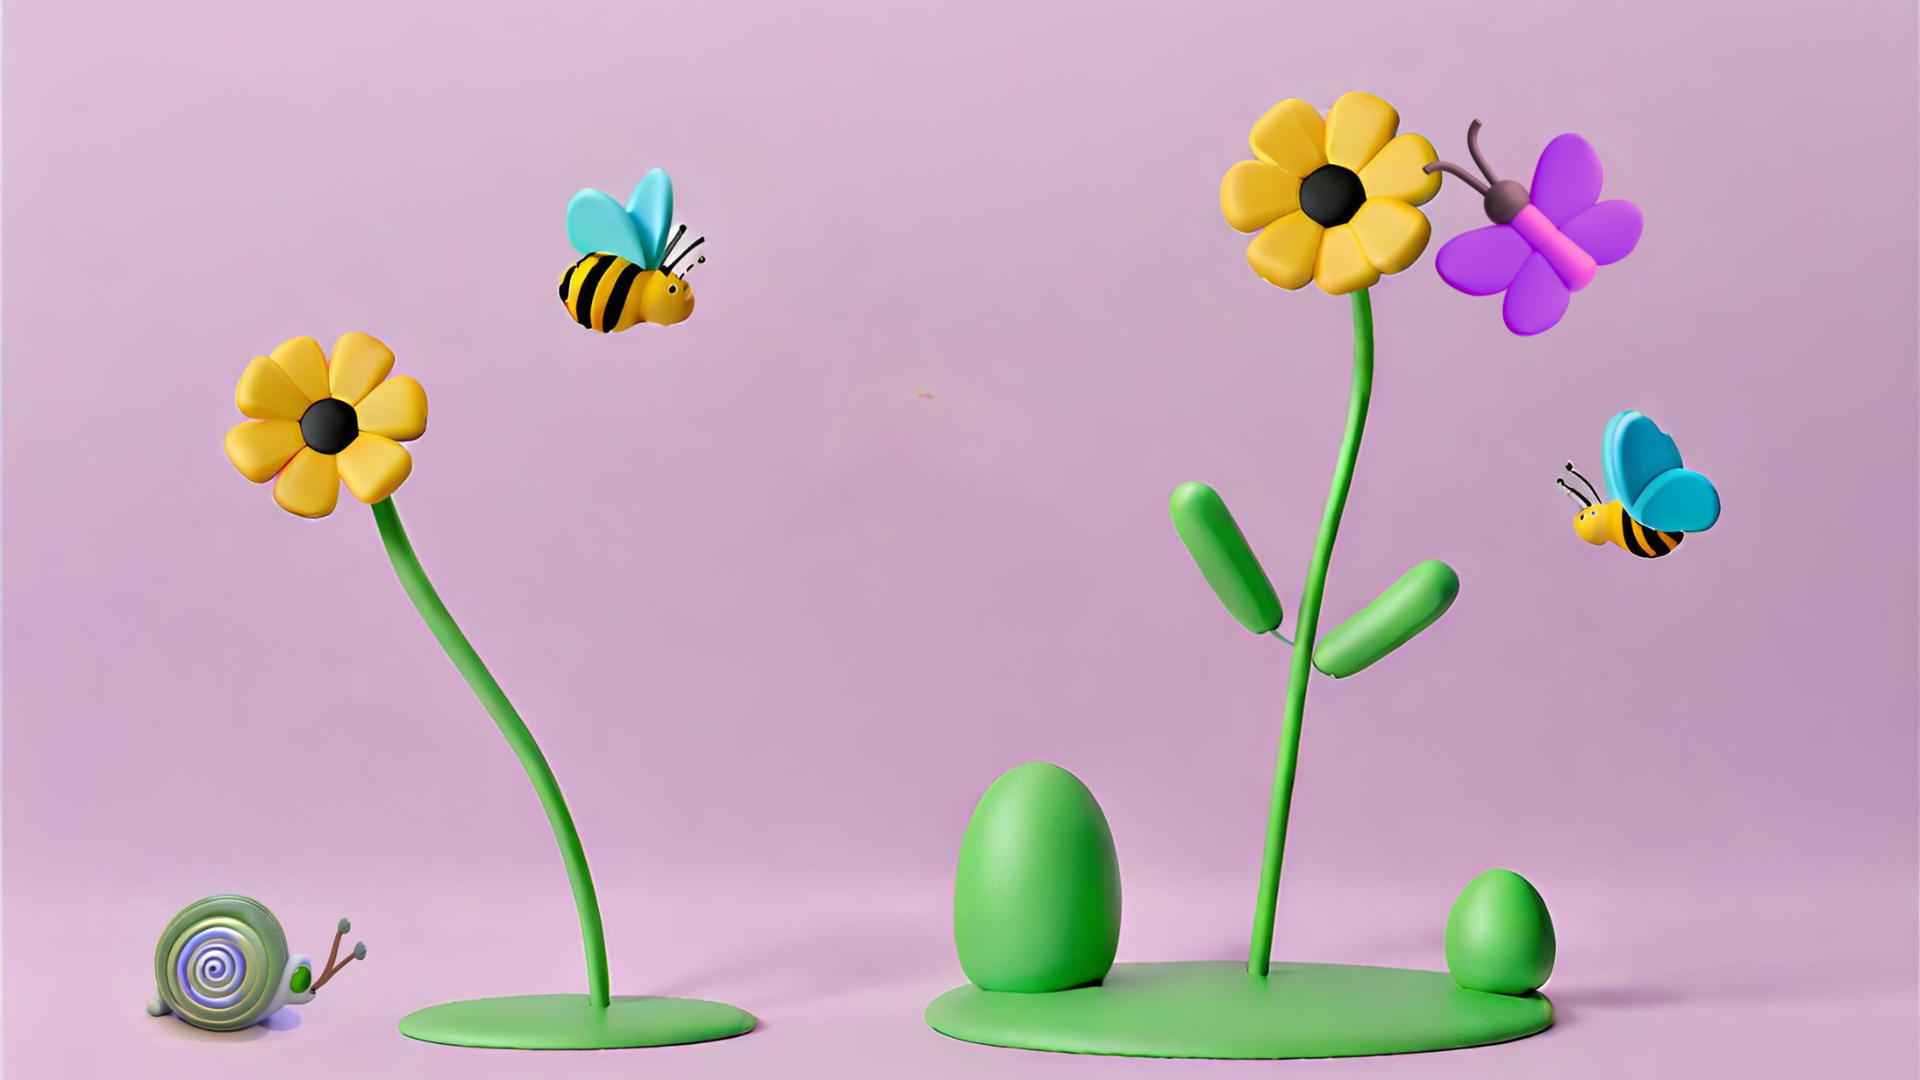 3D model of bumble bees, a butterfly flying around two yellow flowers — their green stems planted in the ground where a snail is seen 